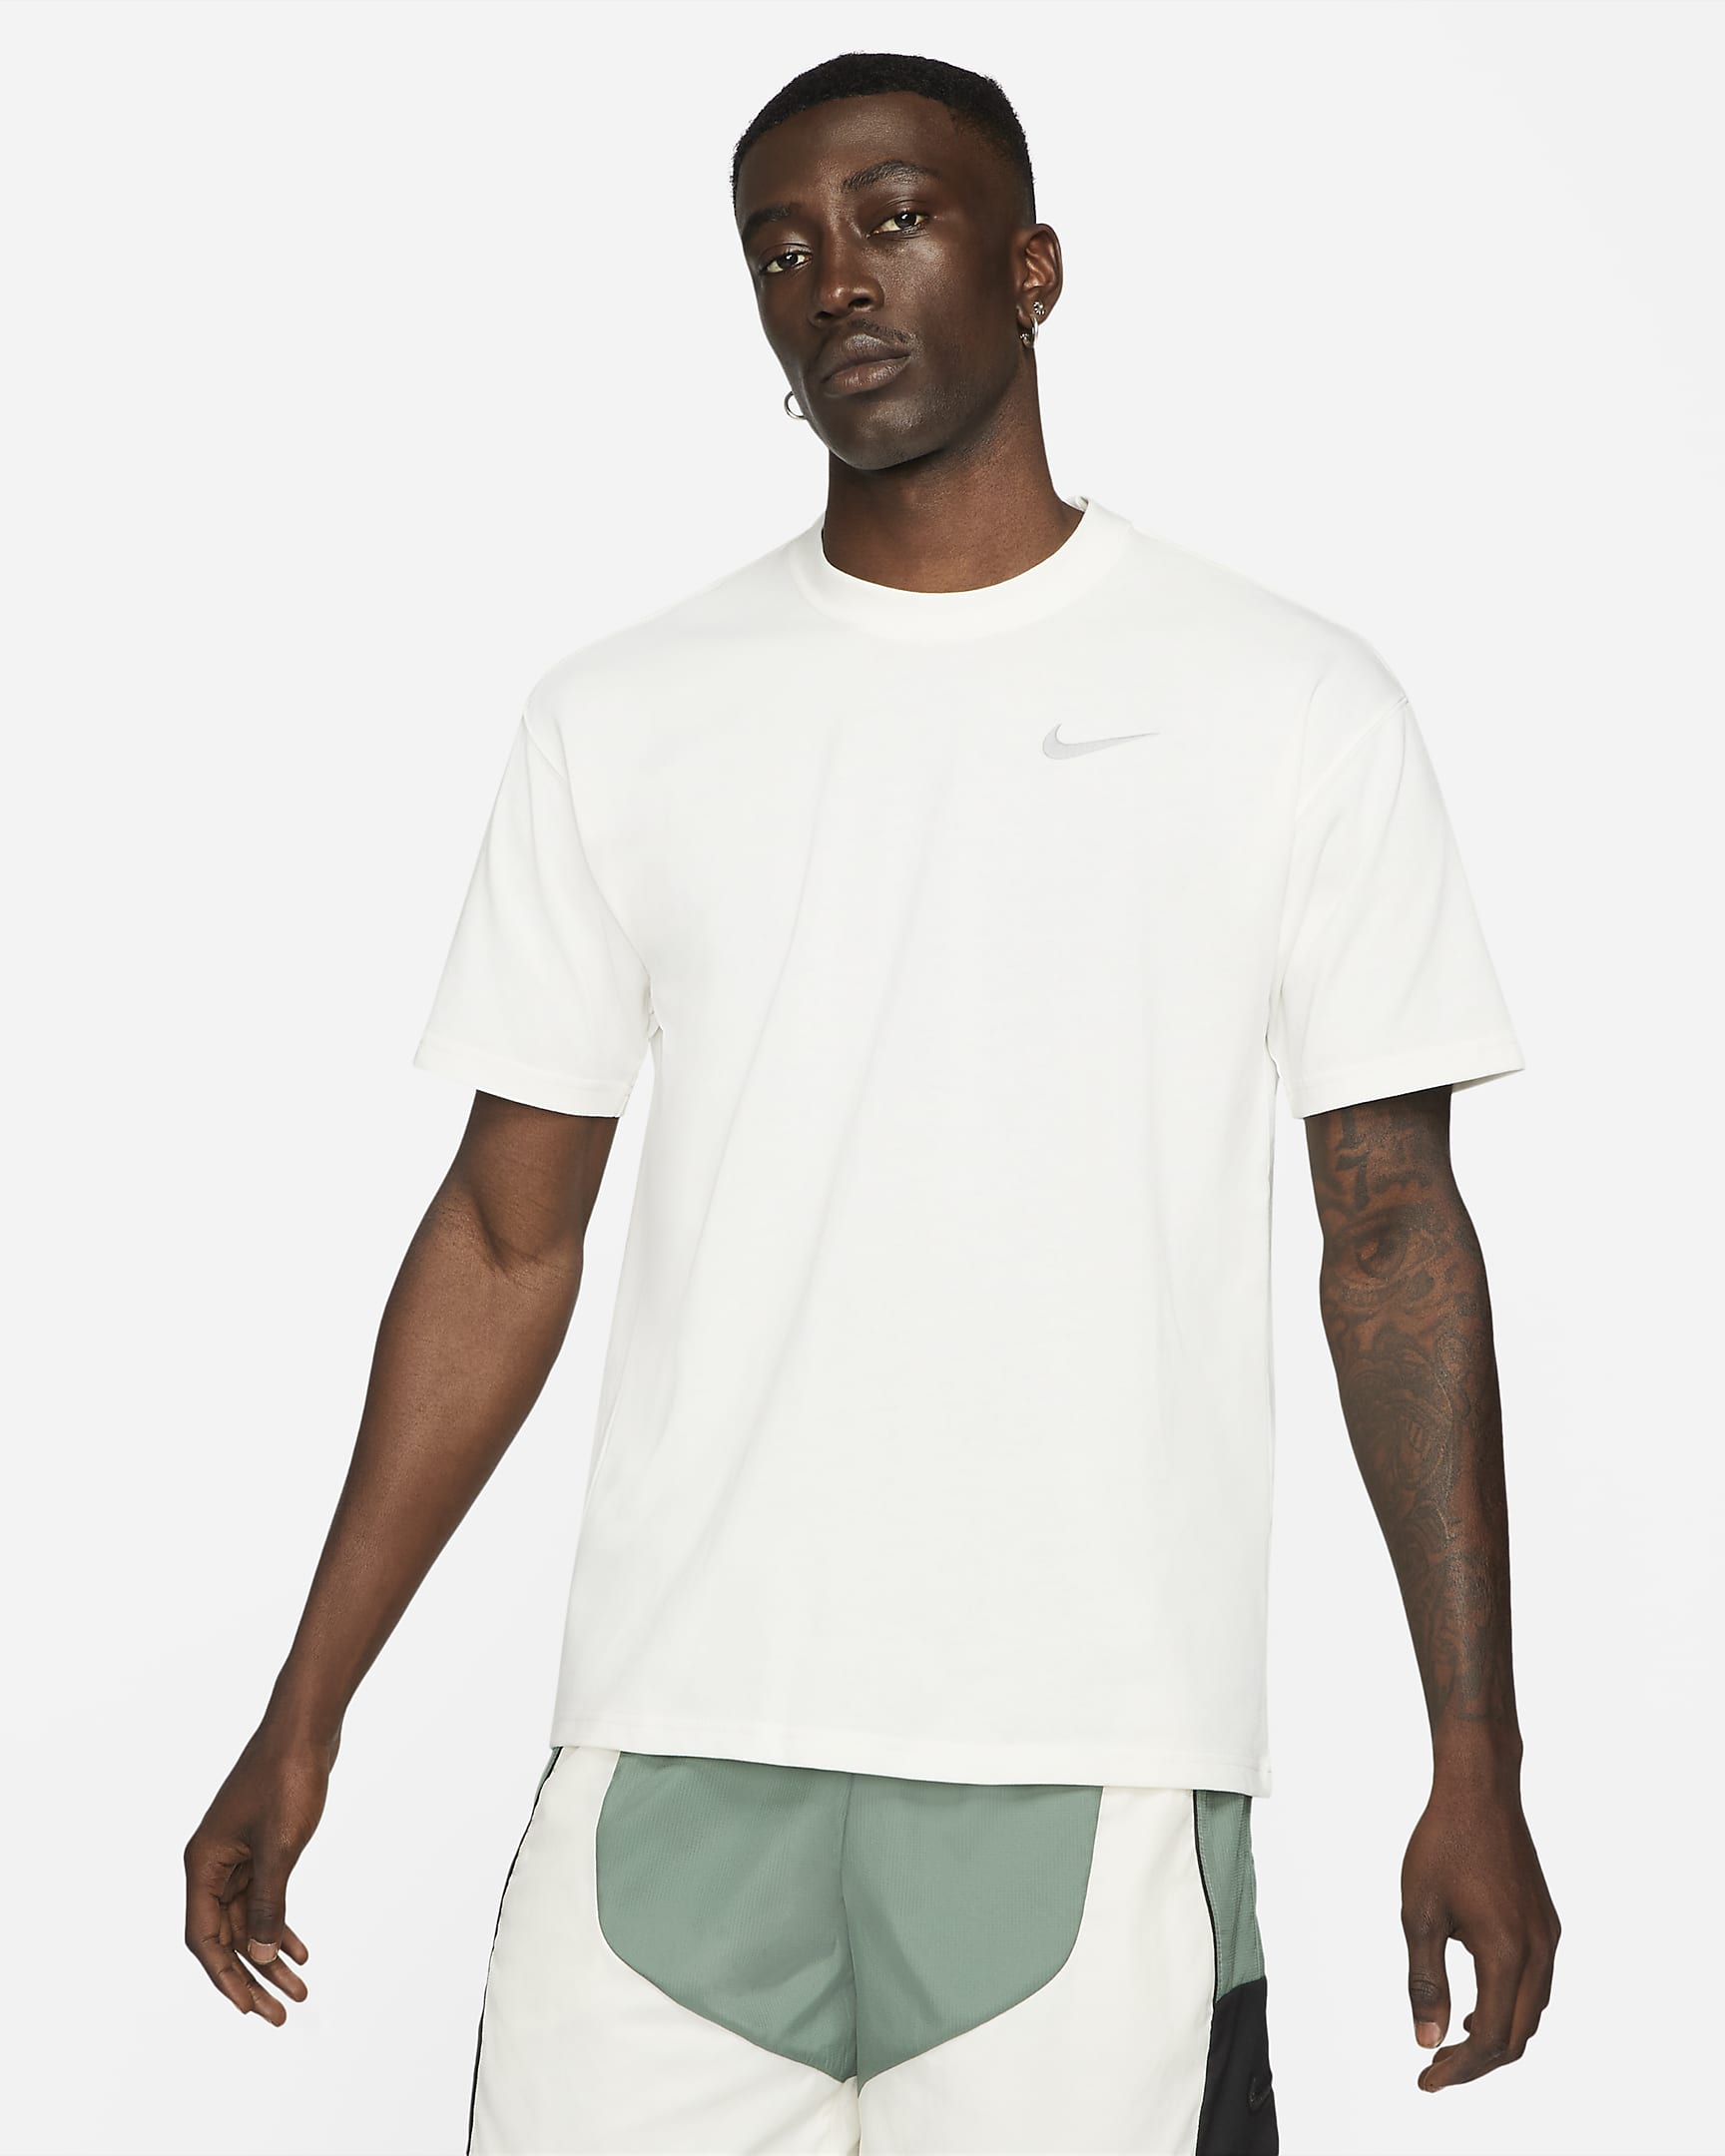 Nike: Up to 40% Off Performance Styles + Free Shipping